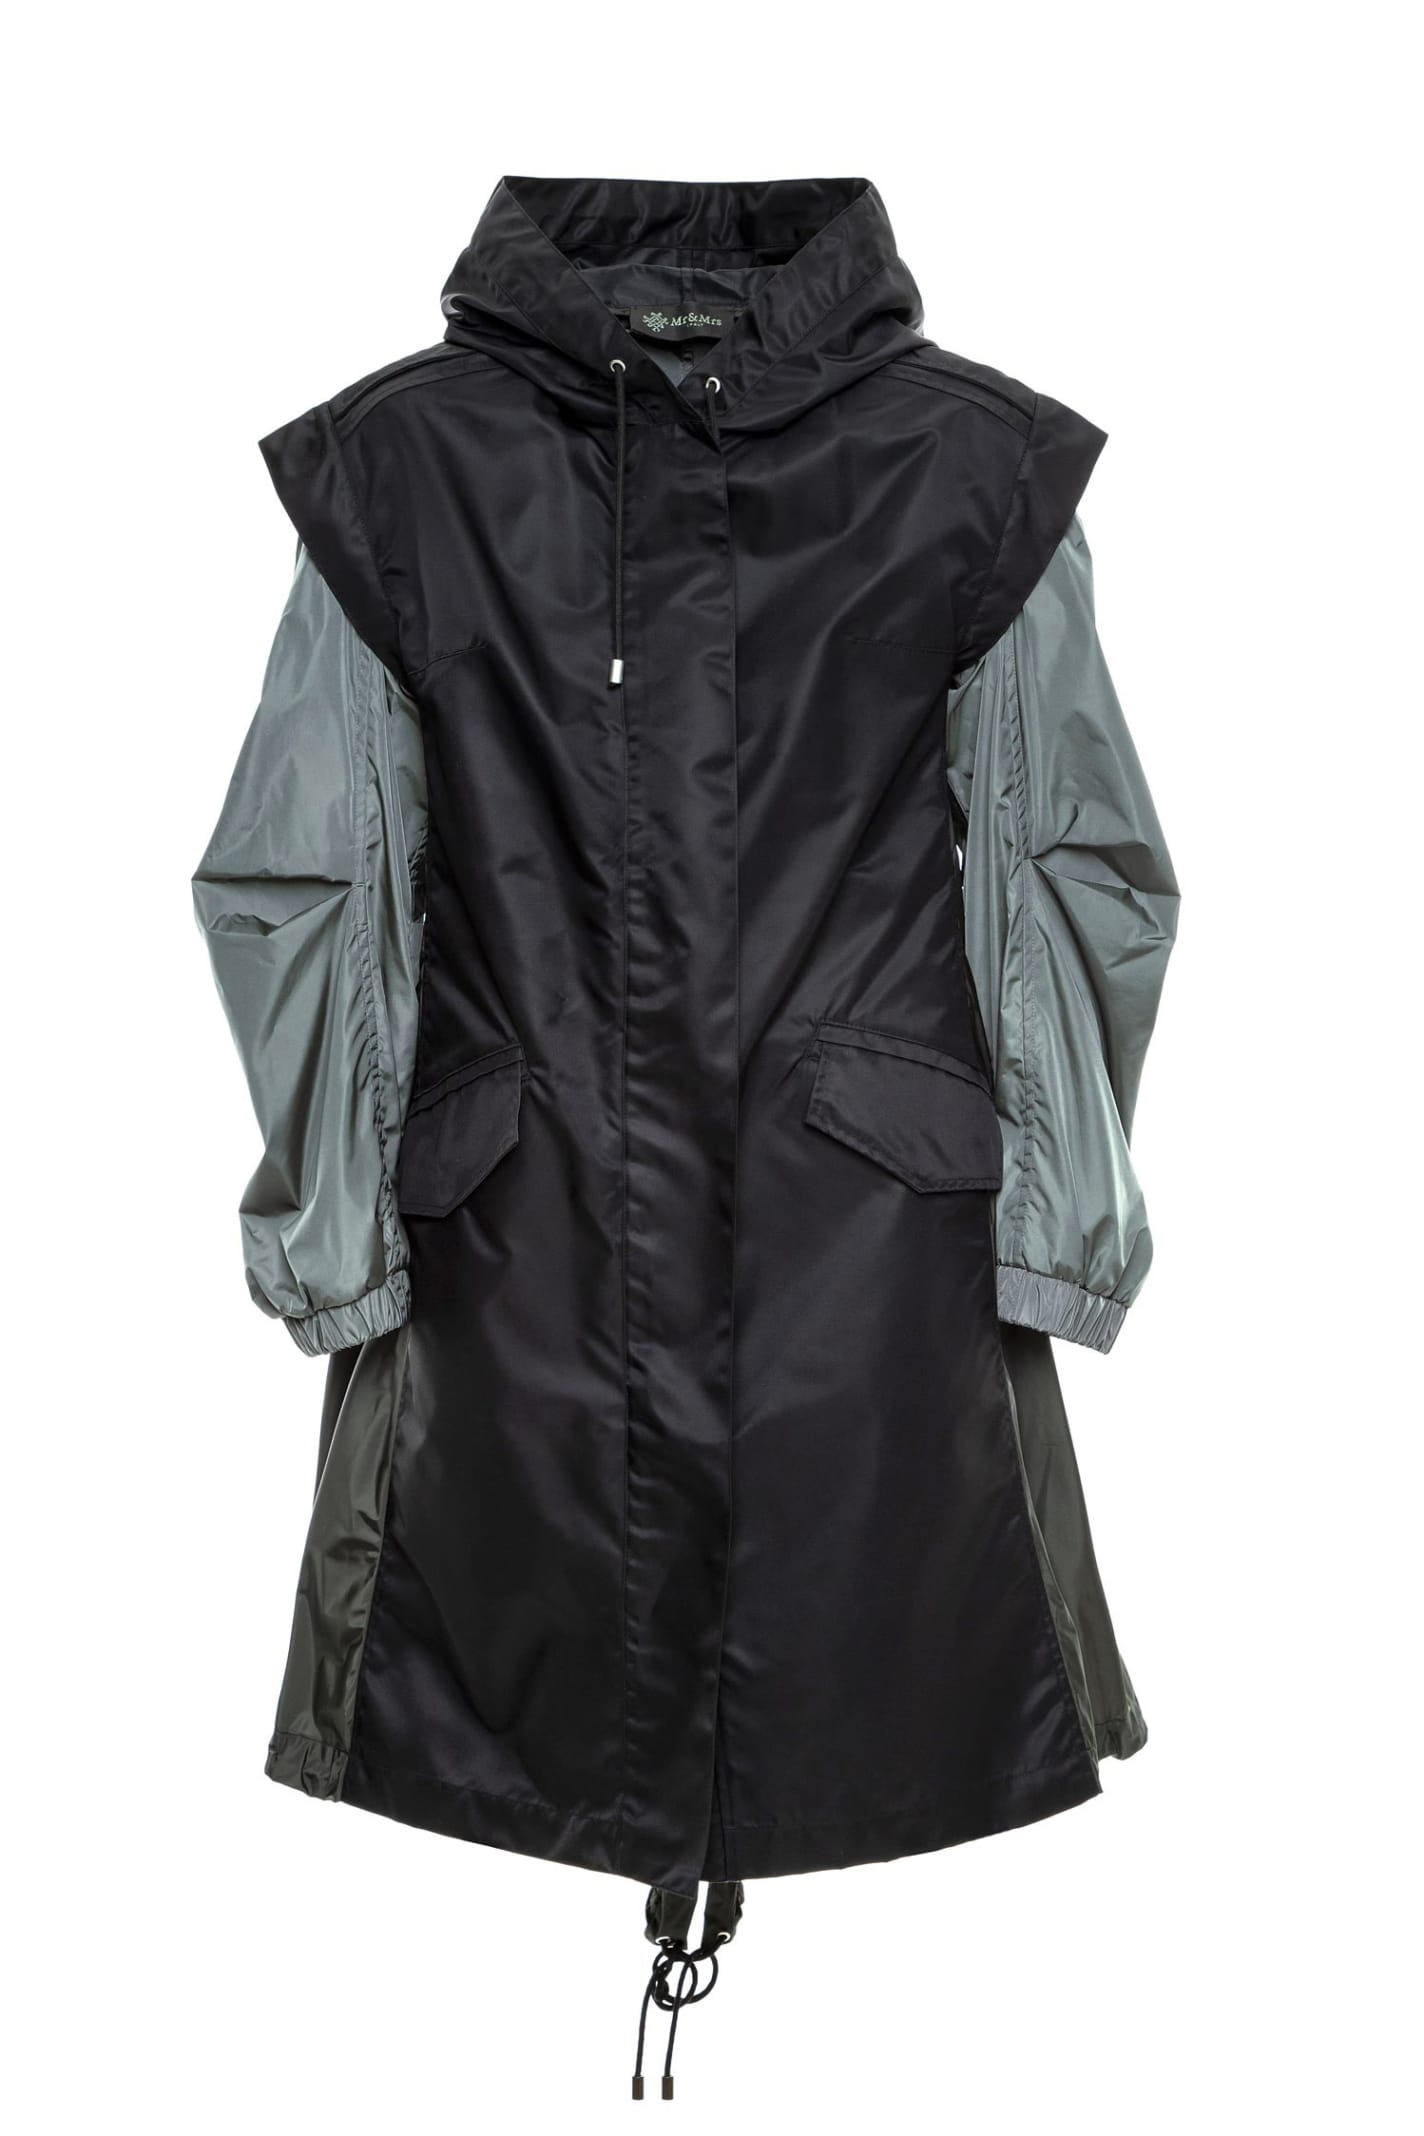 Mr & Mrs Italy Two-ways Rainproof Parka For Woman